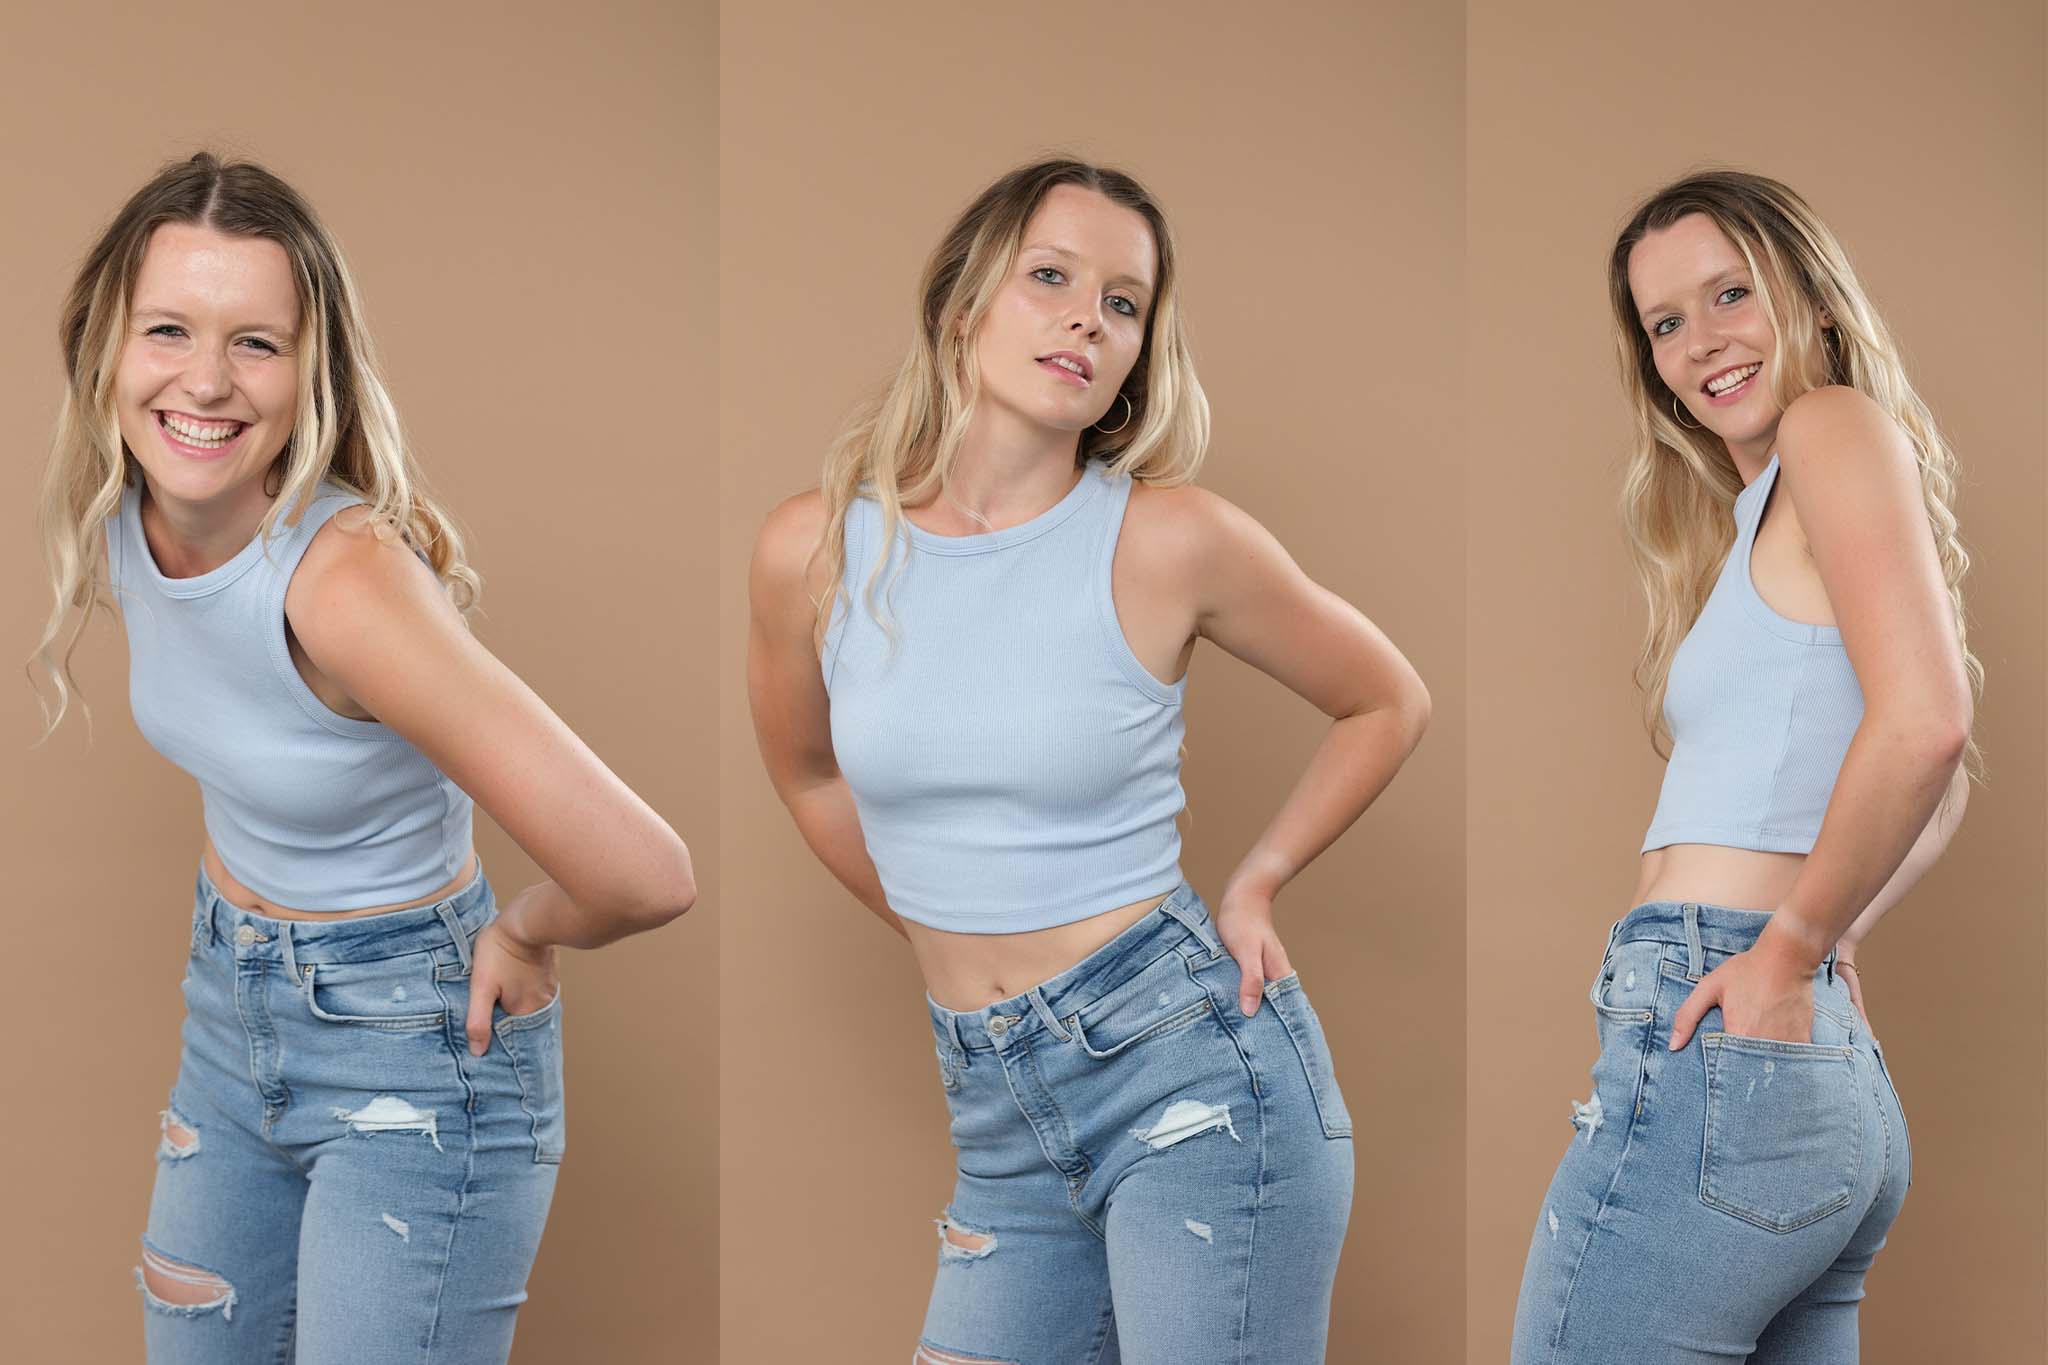 how to pose for photos, a collage with posing variations